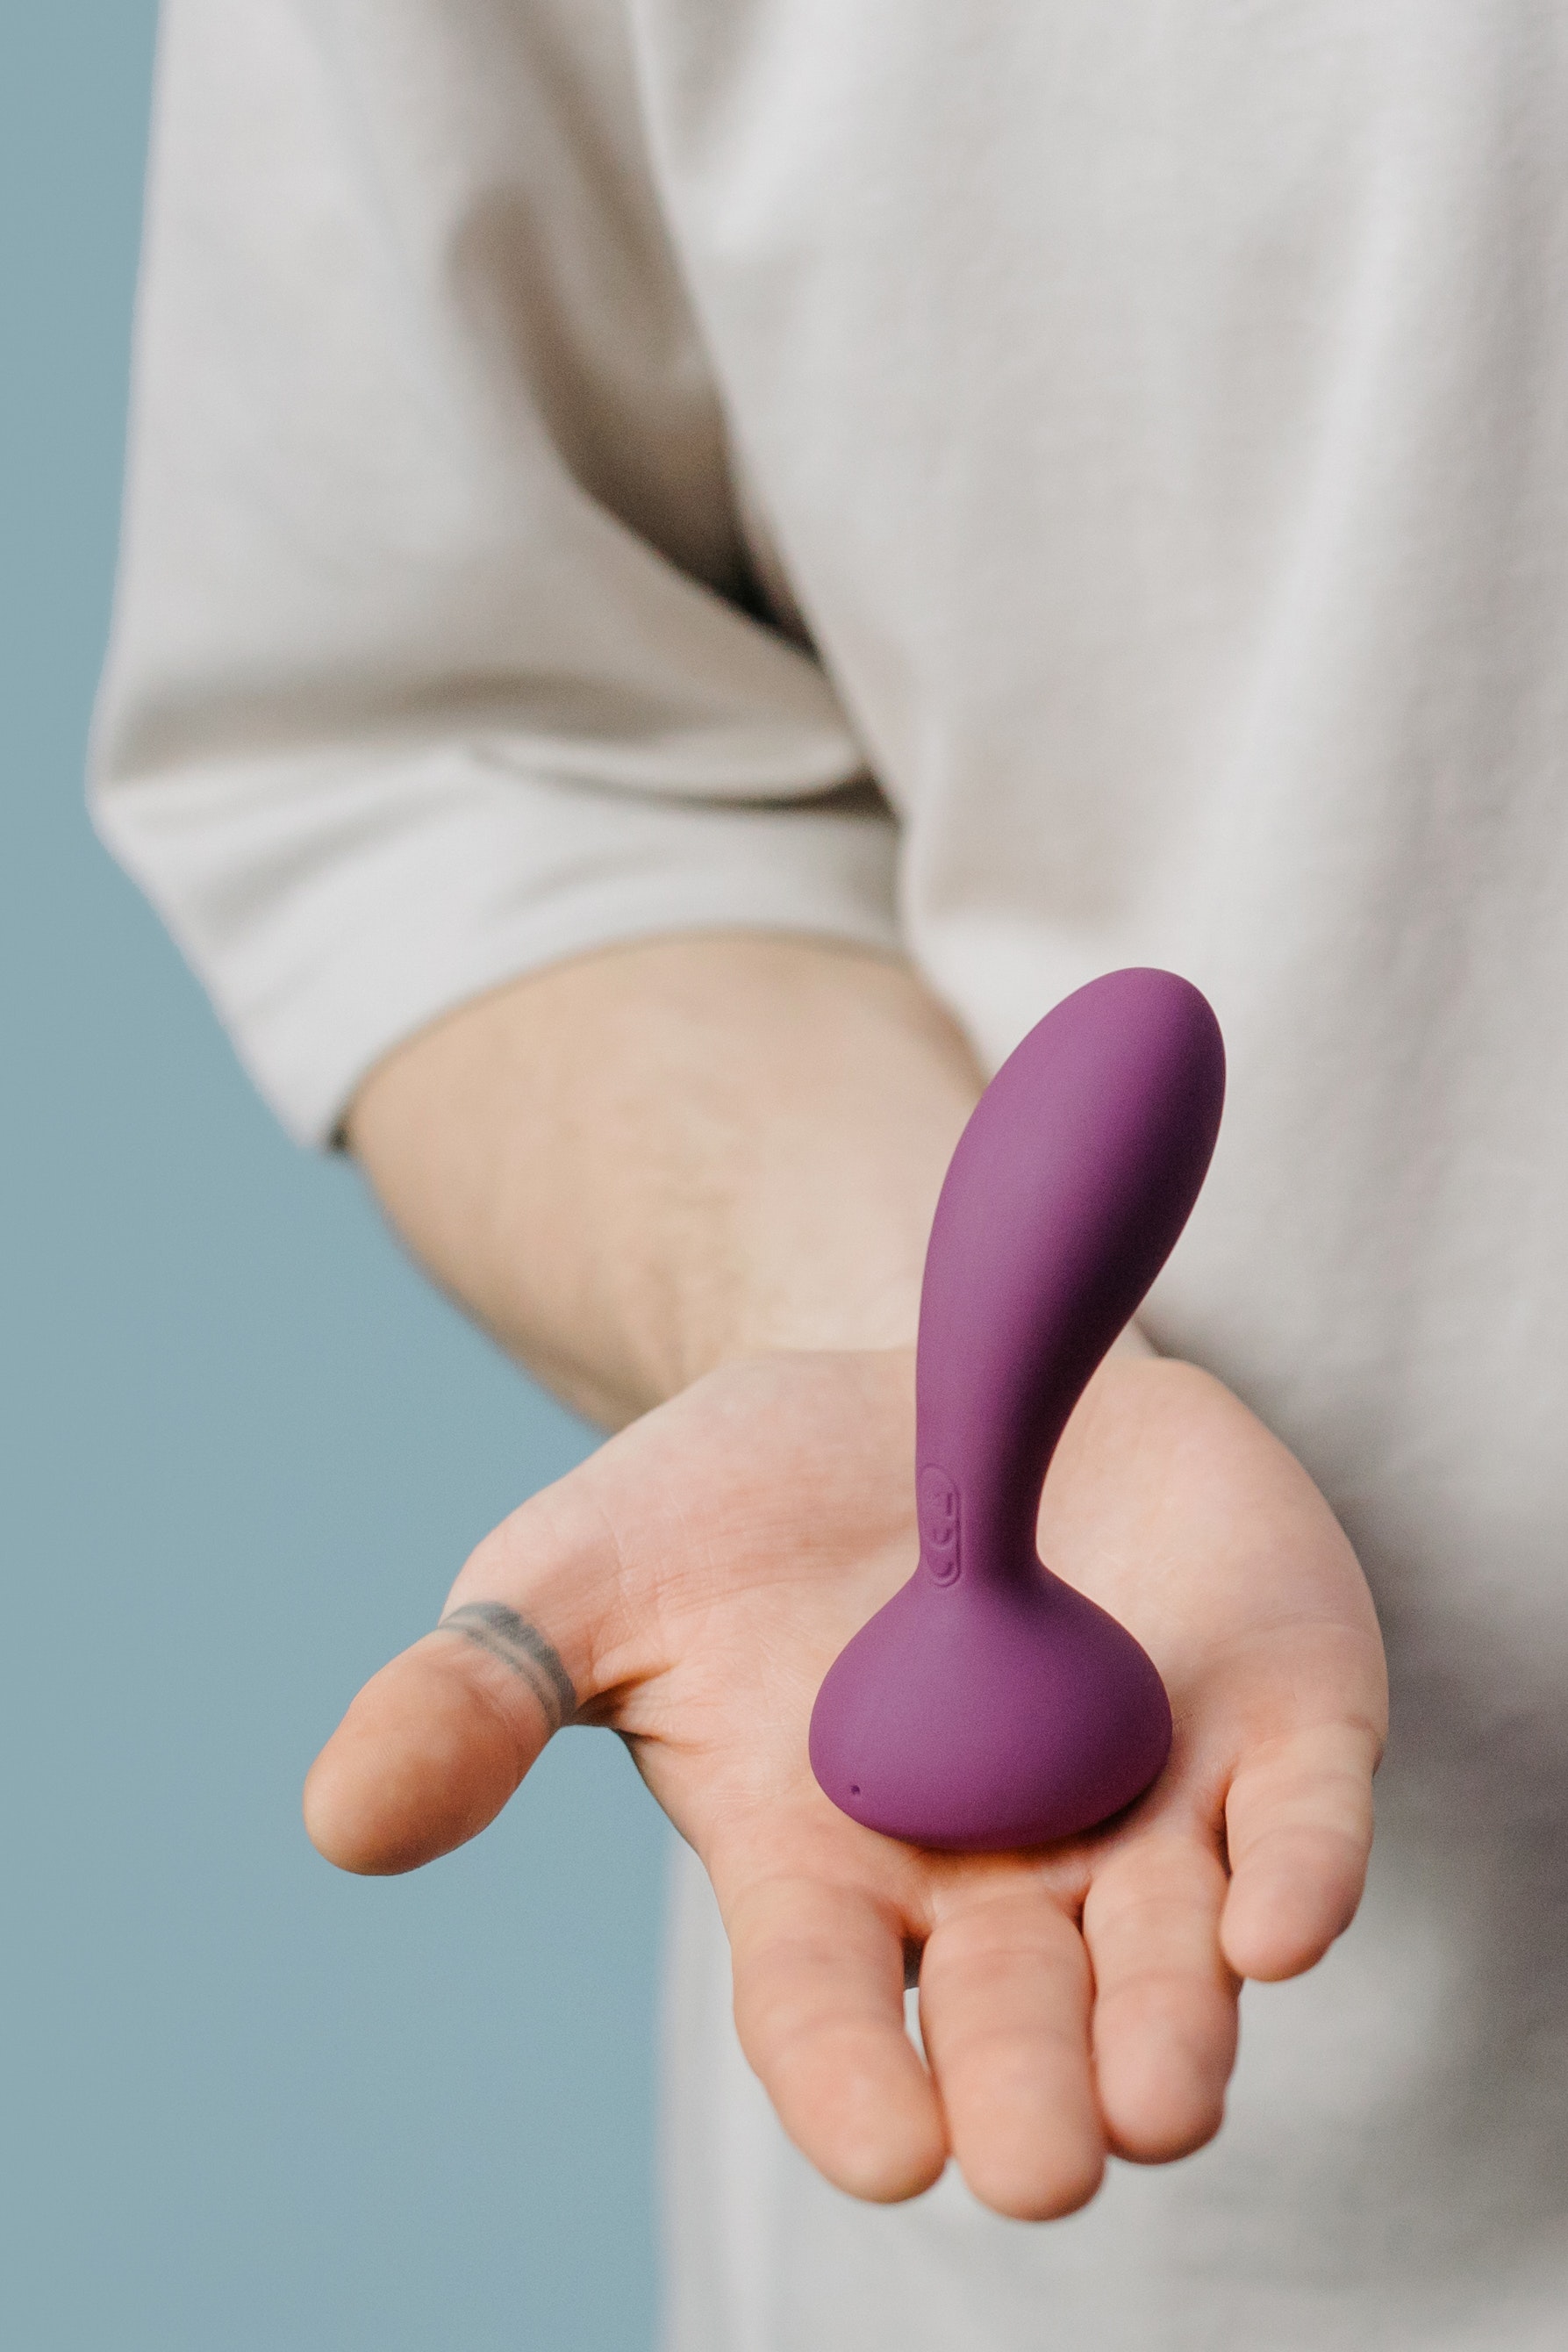 Mary uses A Vibrator For The First Time In Her Life